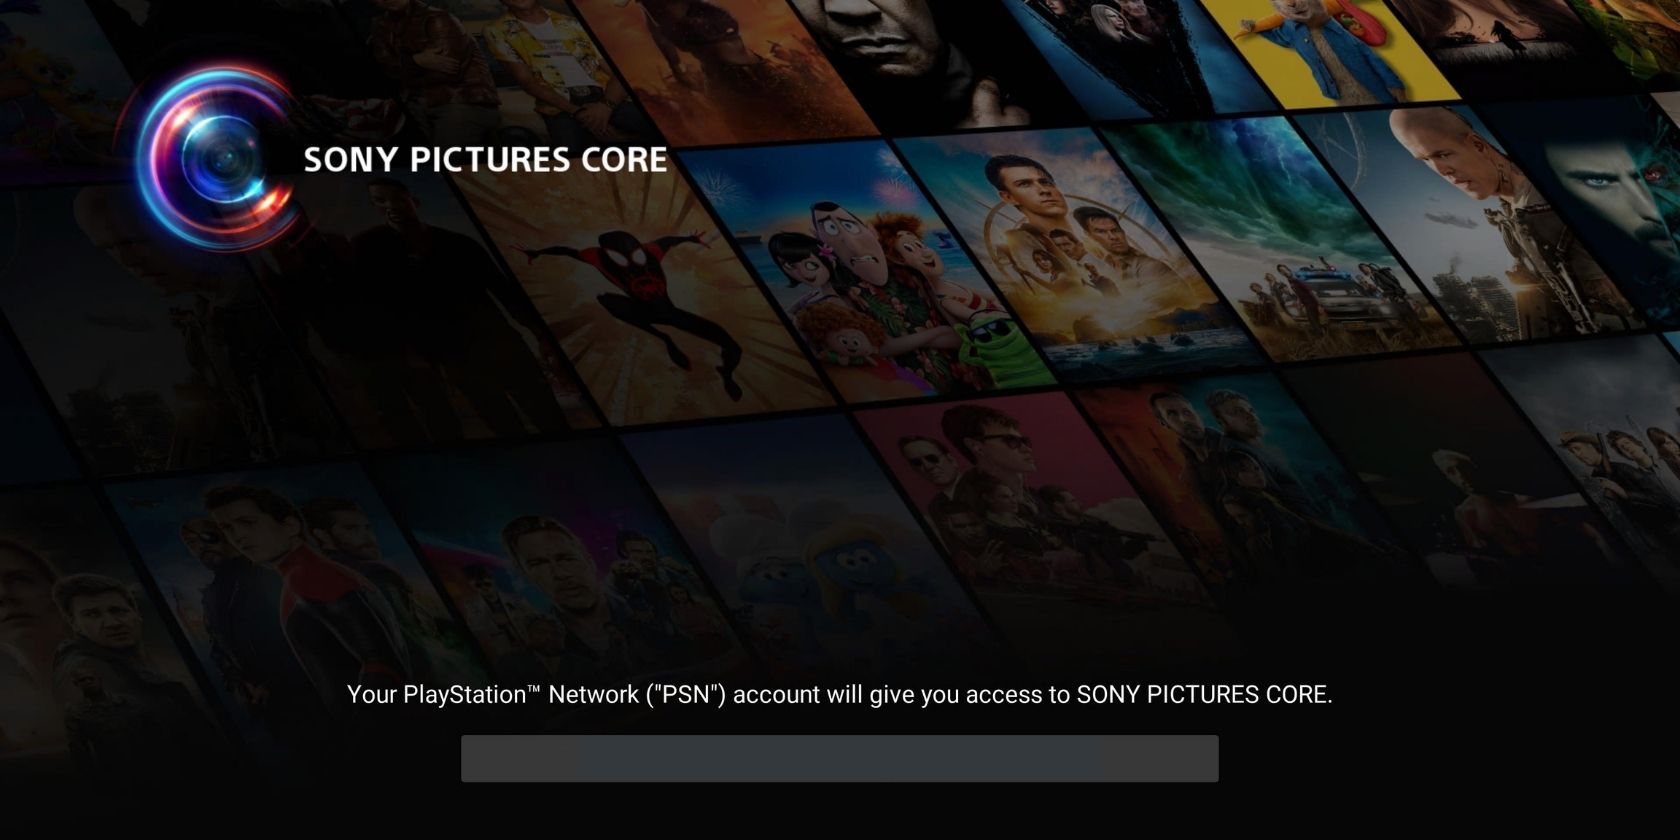 Link PS Plus Account on Sony Pictures Core